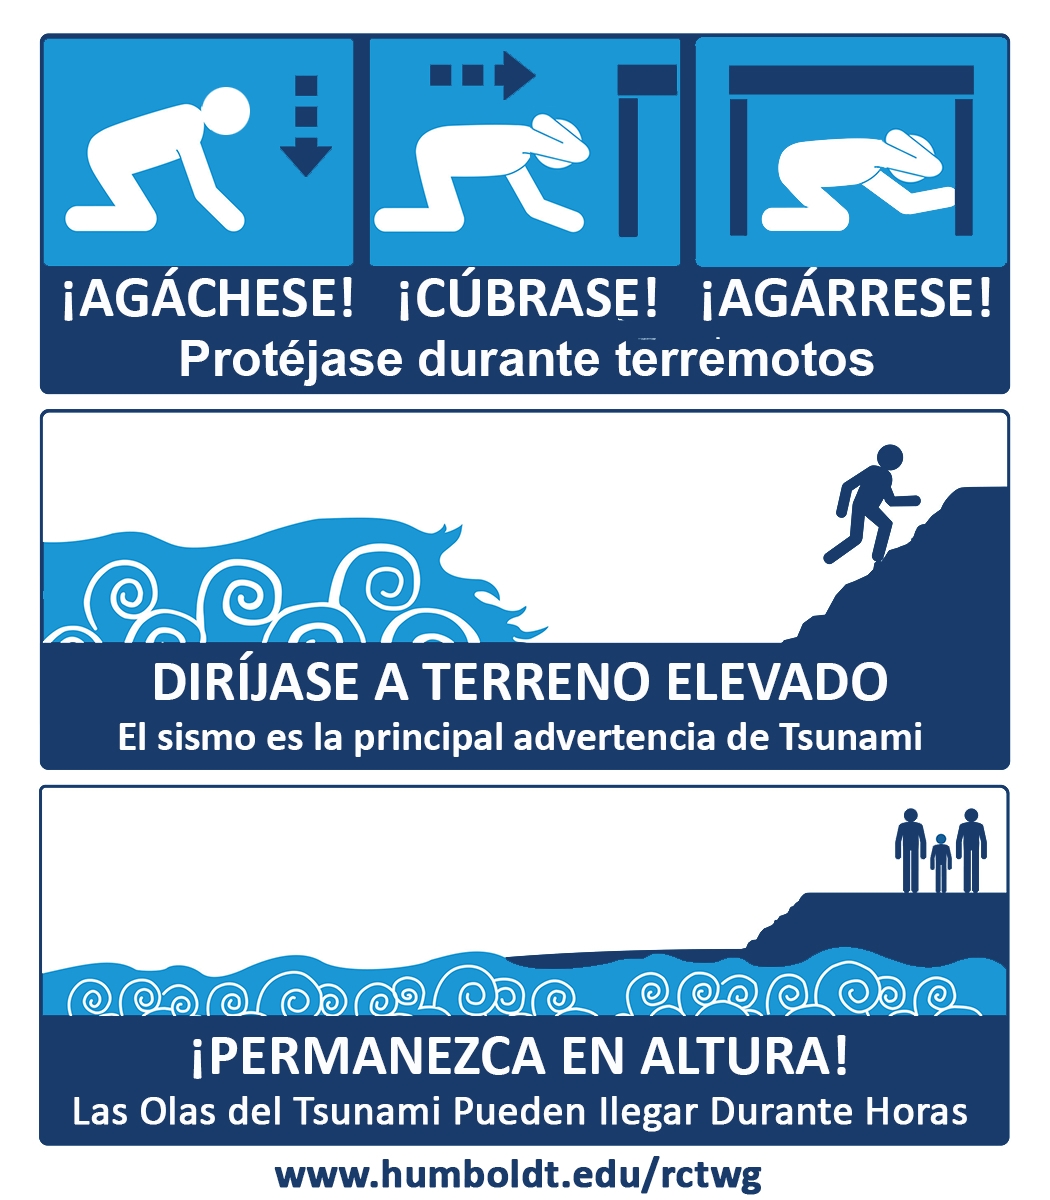 Preparedness steps for earthquakes and tsunamis in Spanish